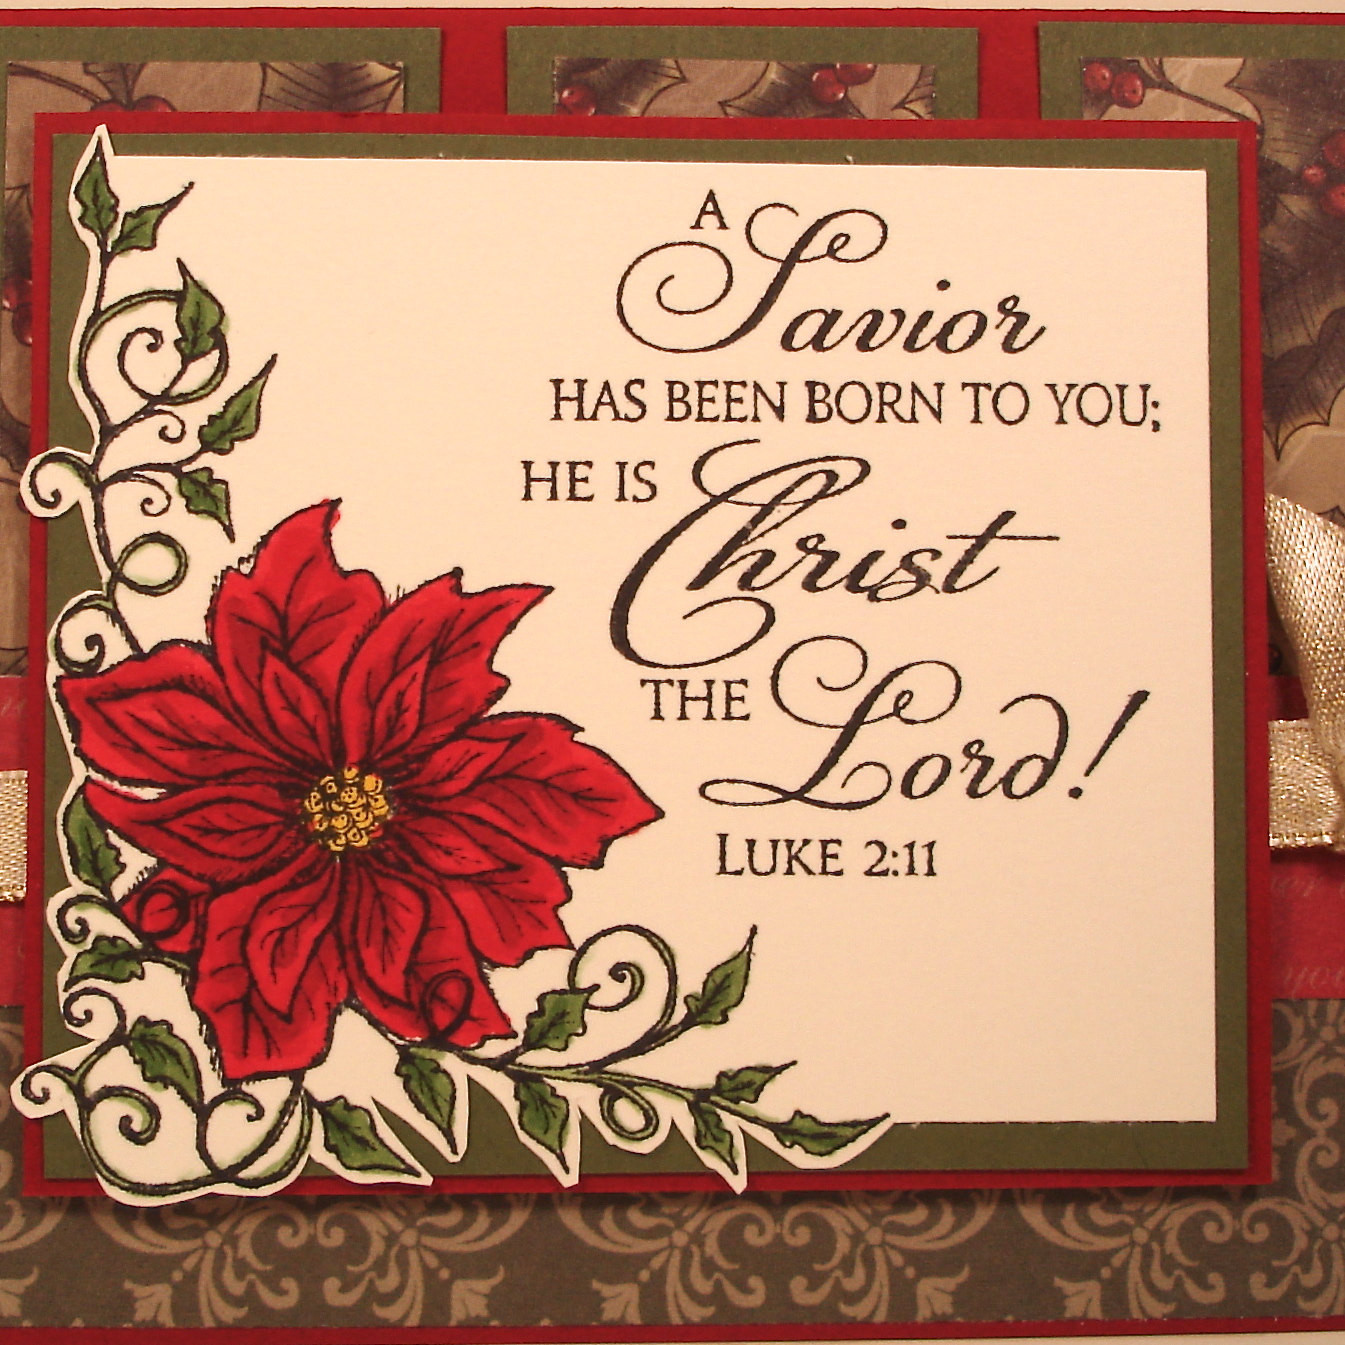 Religious Christmas Card Quotes
 Religious Christmas Card with Bible Verse and Poinsettia